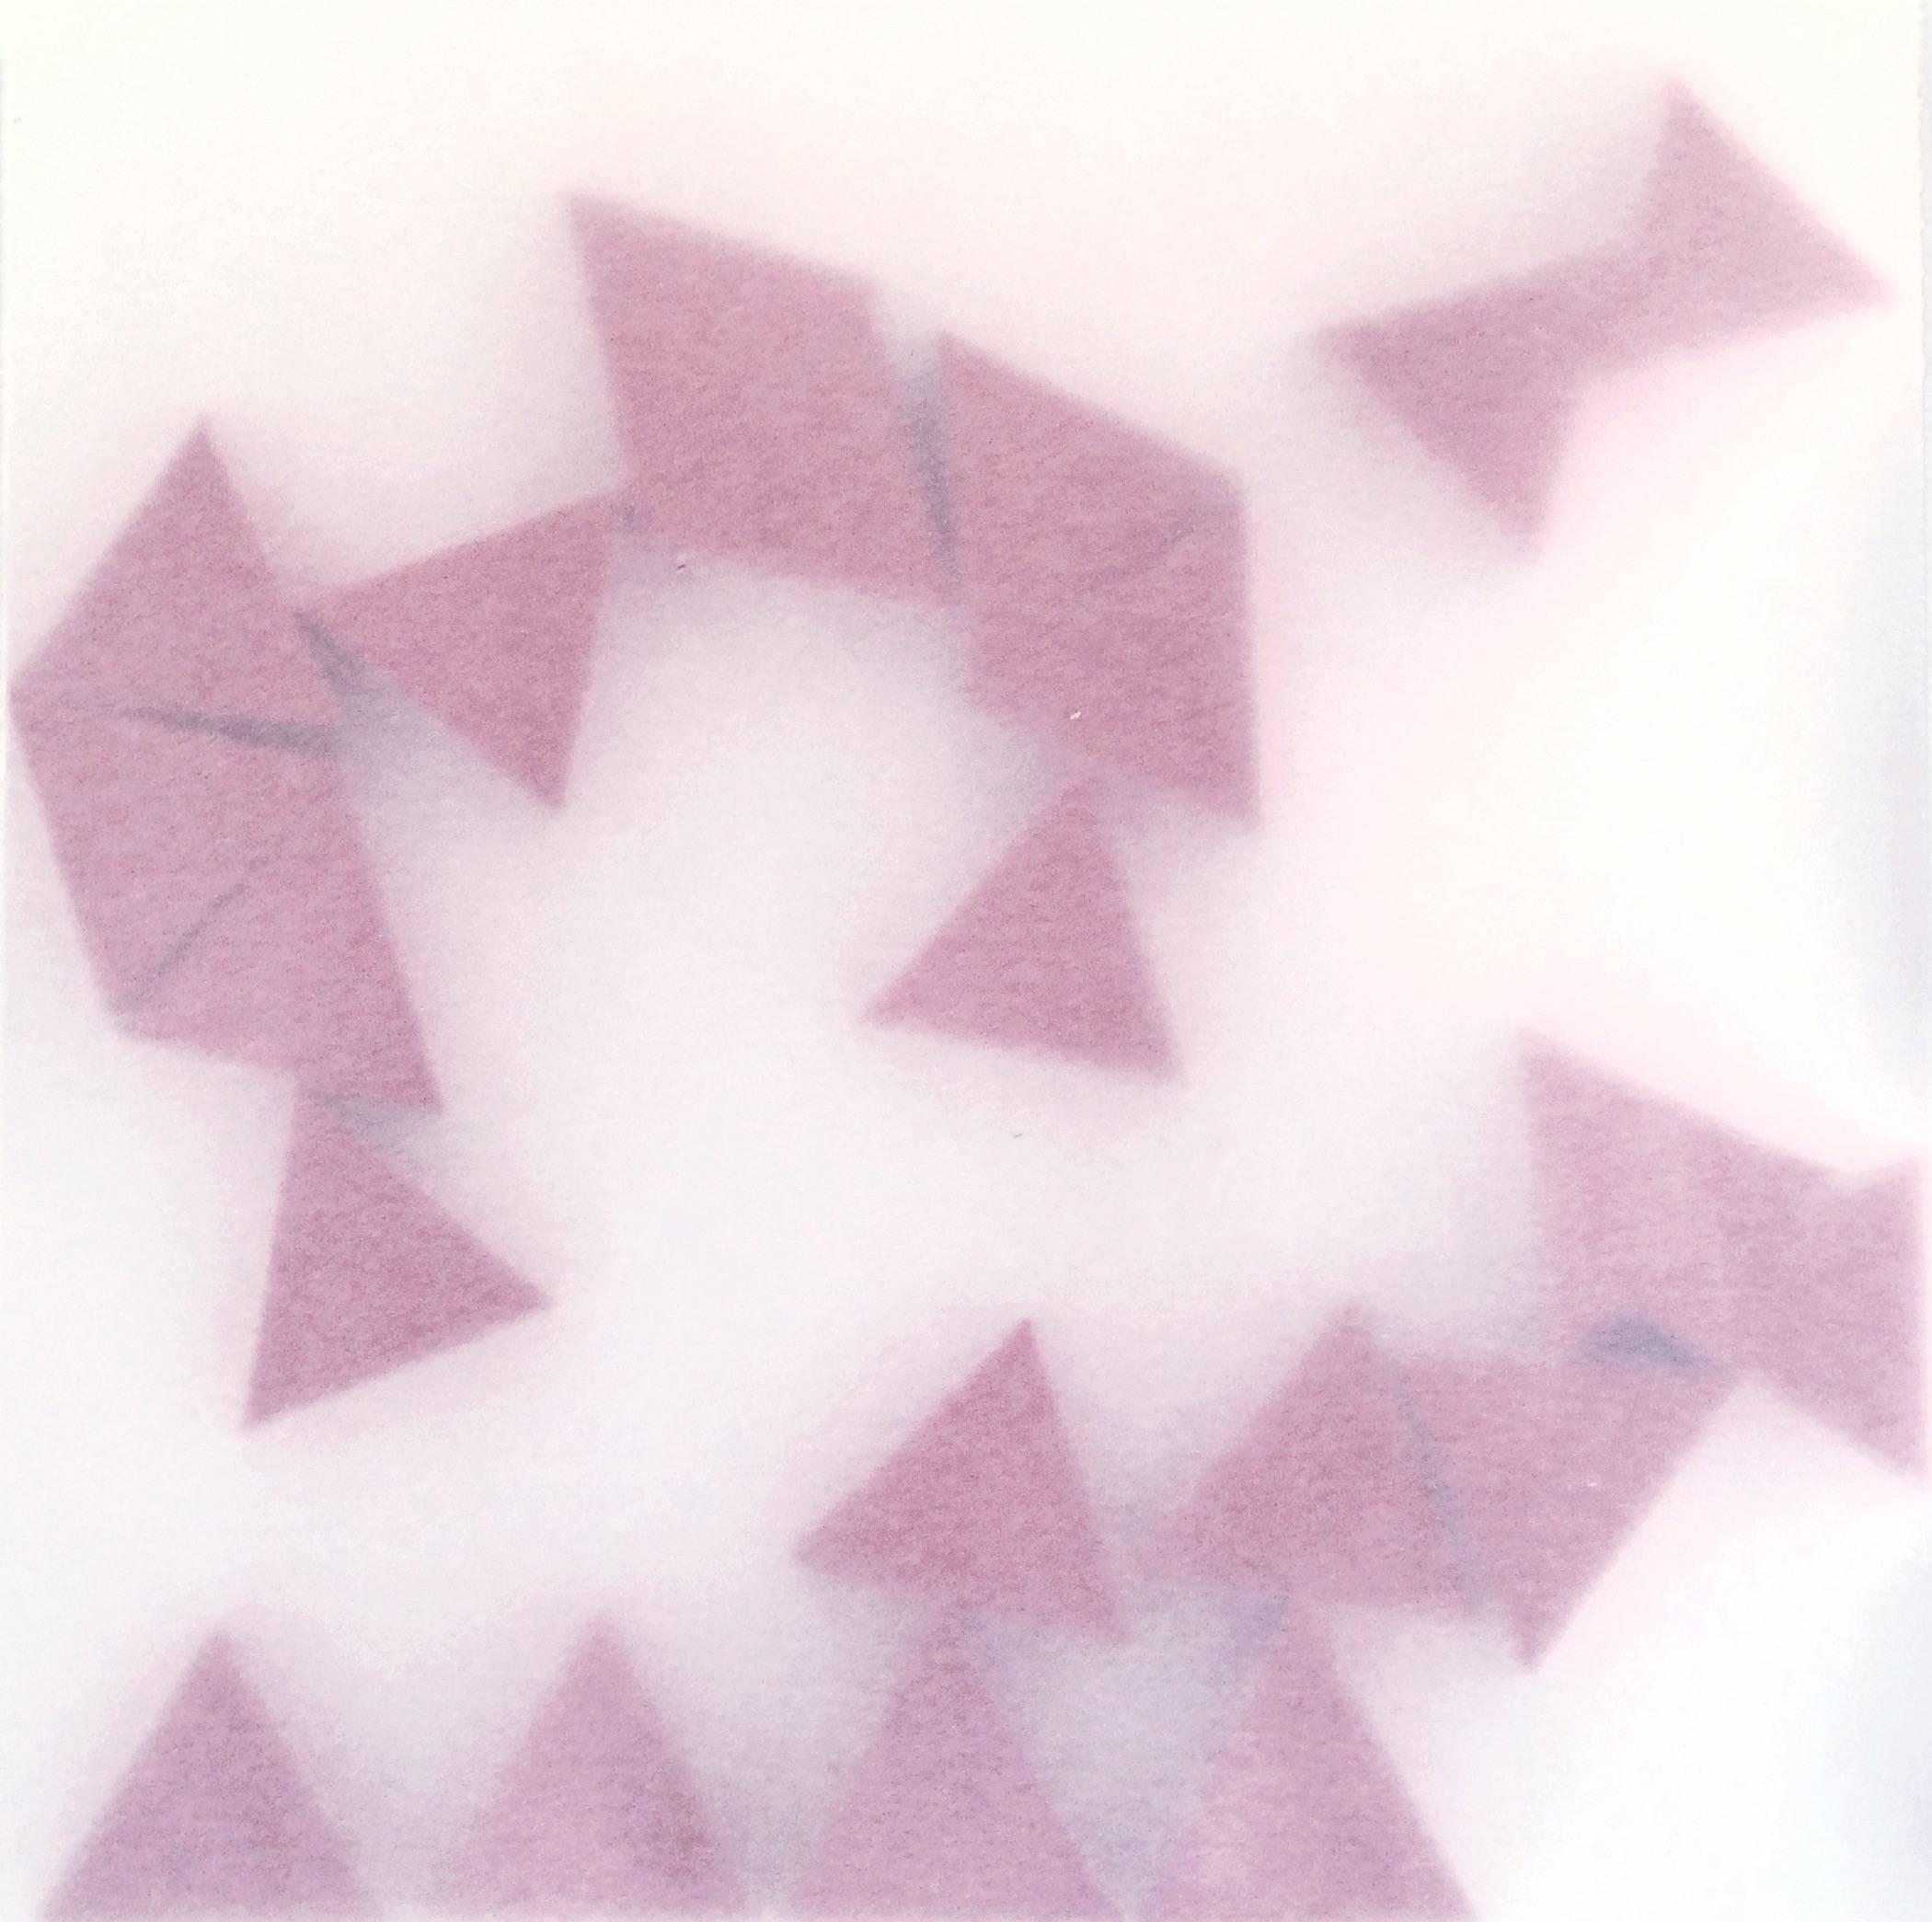 Norma Marquez Orozco, „Red Triangles (21 Triangles Series“, 2014, Papier 